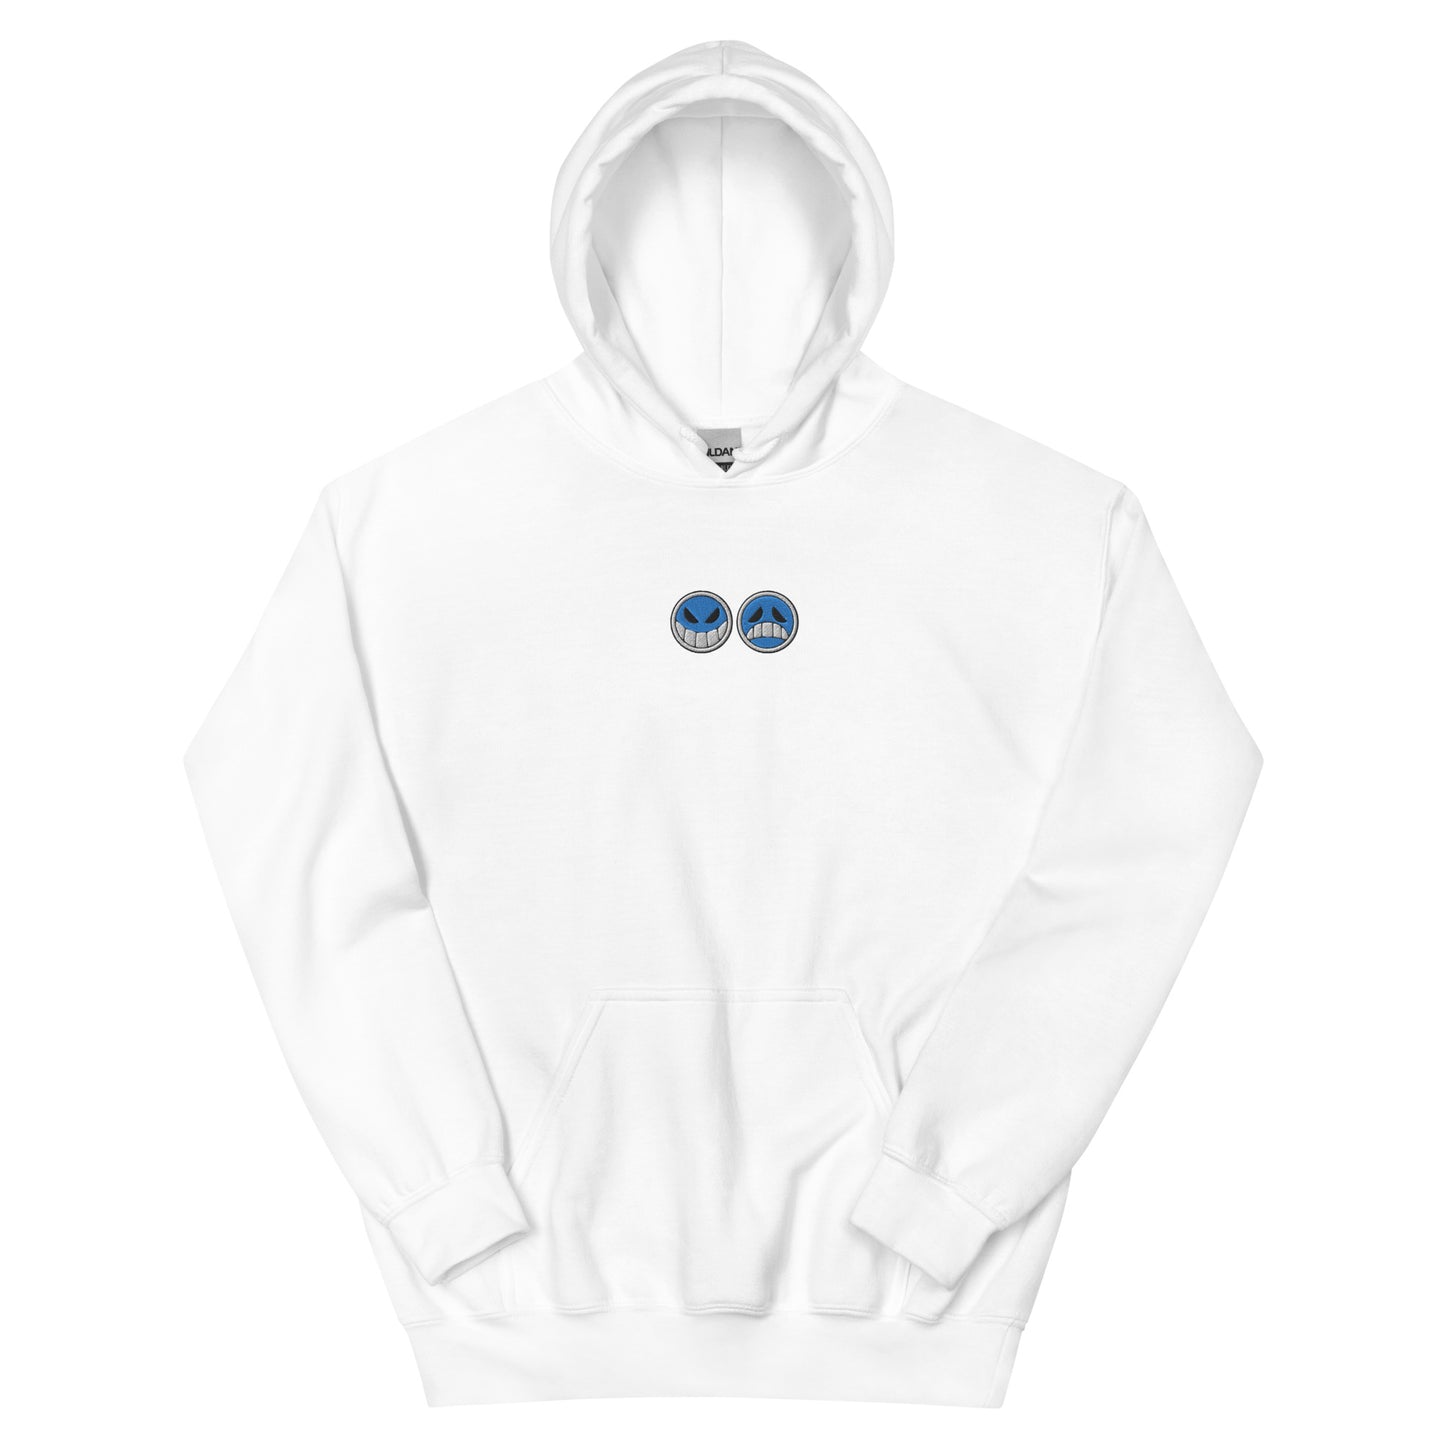 Aces hat embroidered Hoodie Smiley face Sad face Anime crew neck sweatshirt